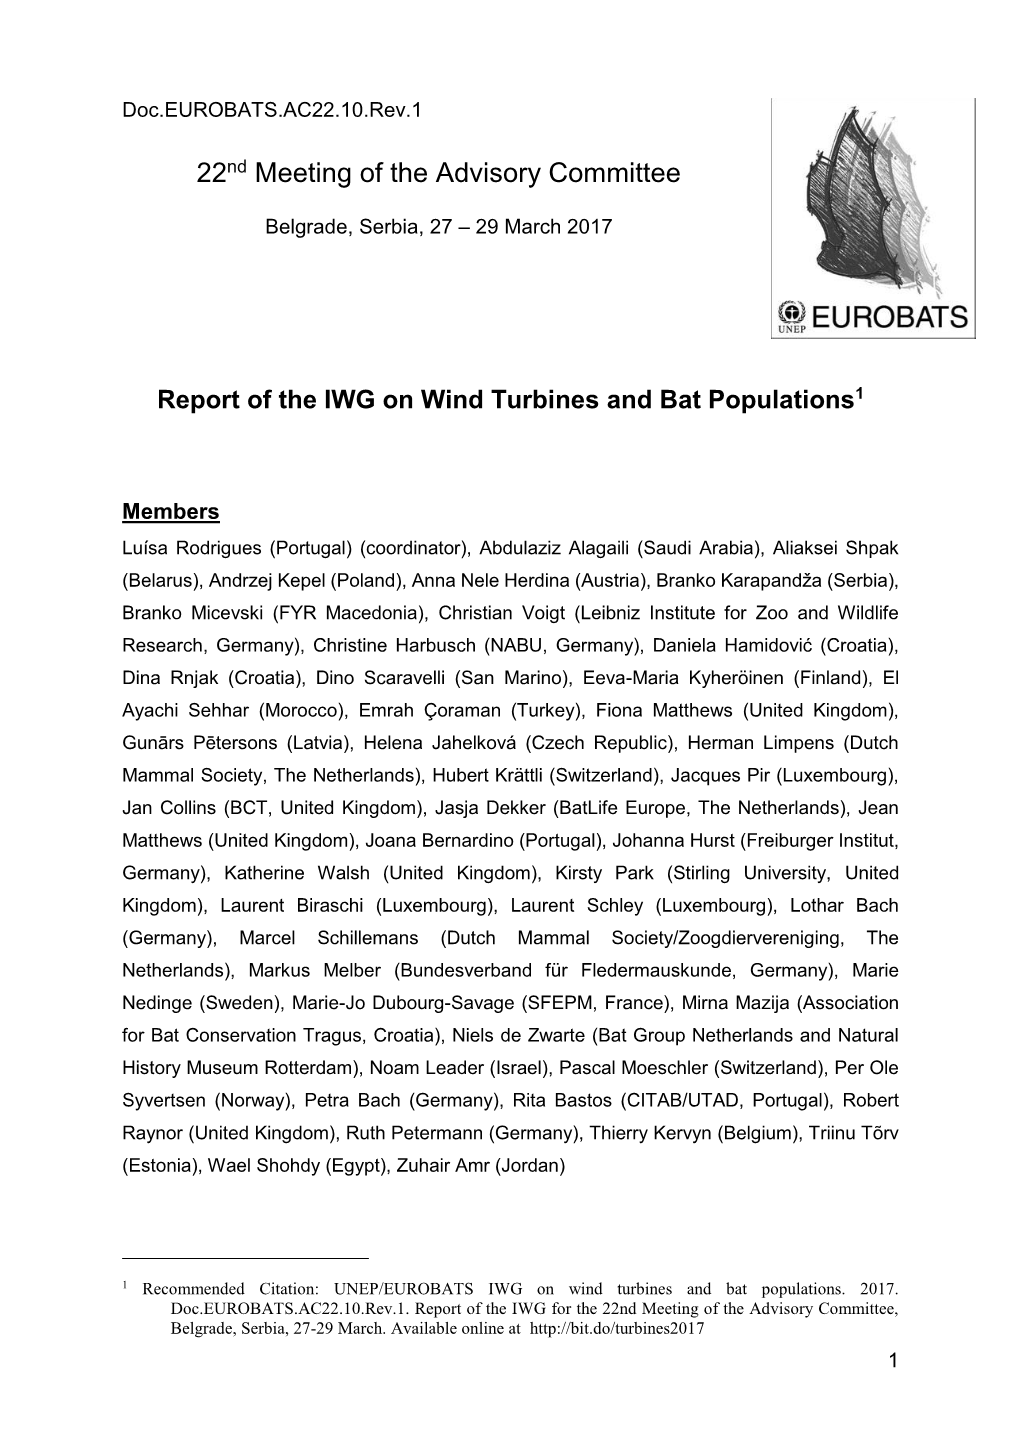 Report of the IWG on Wind Turbines and Bat Populations 2017